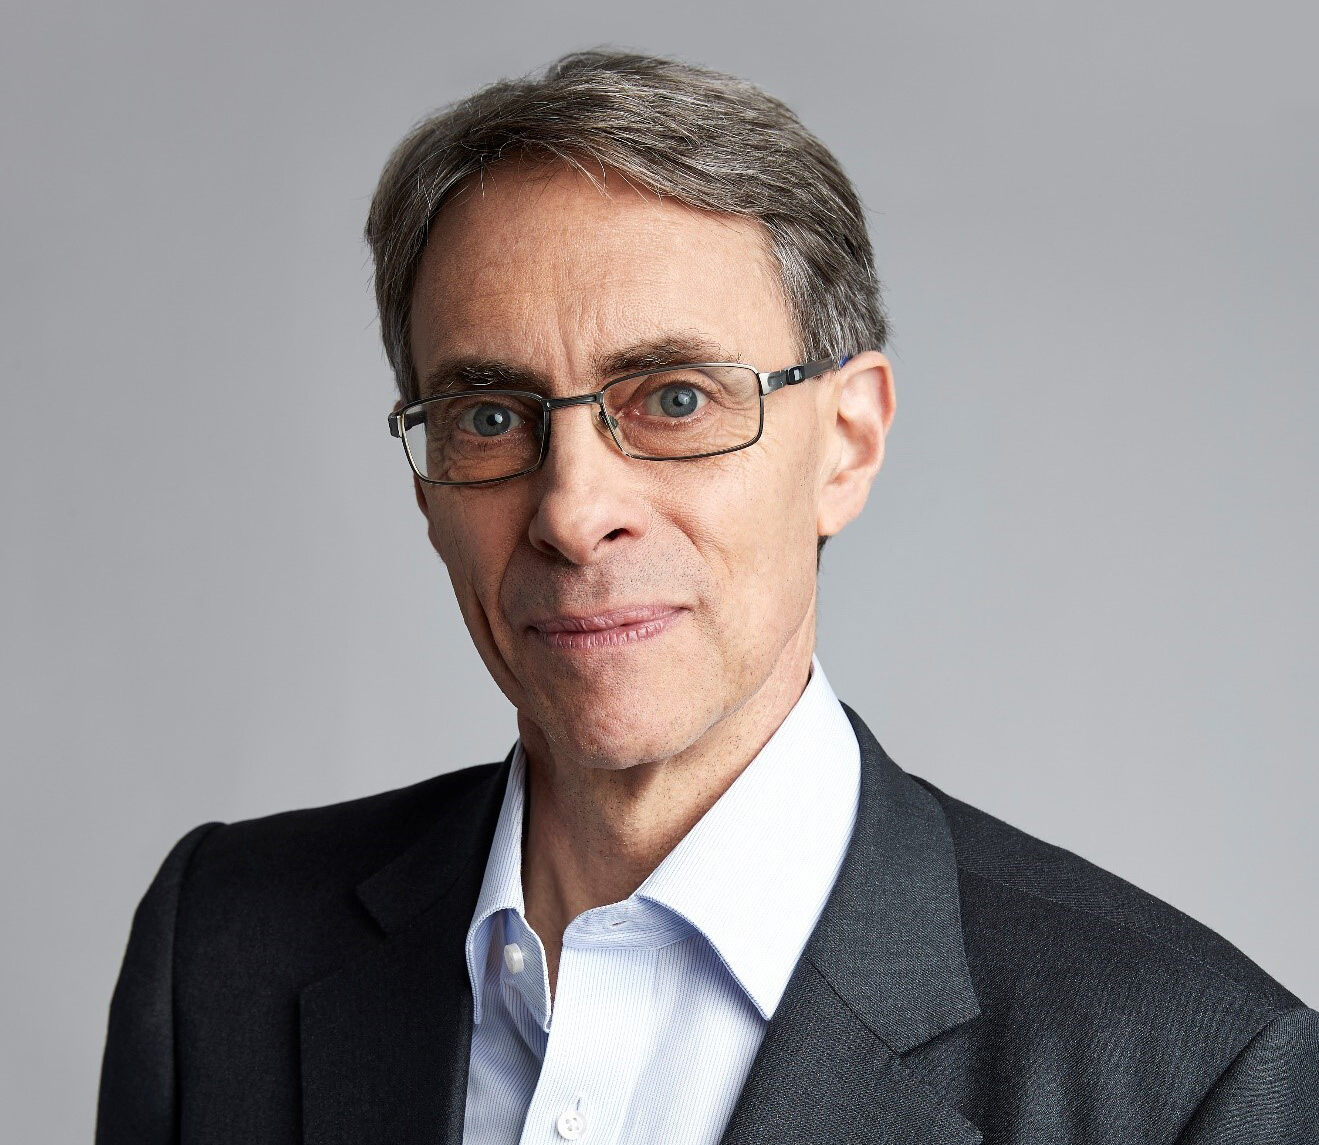 Kenneth Roth, former executive director of Human Rights Watch, looks into the camera in this head shot.